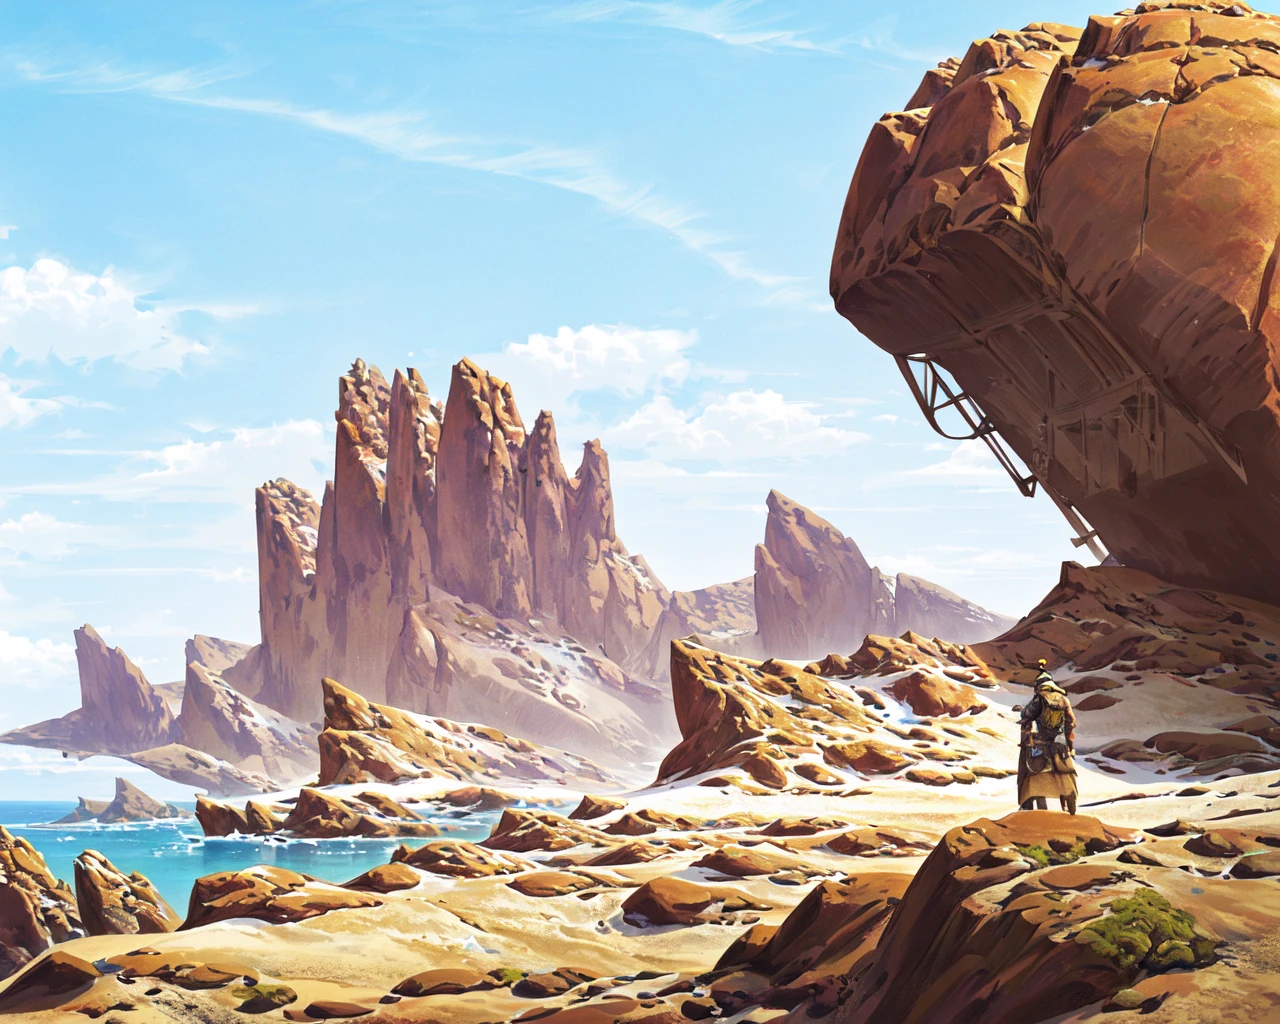 a man standing on a cliff overlooking a desert landscape with a giant rock formation in the foreground and a ship in the distance